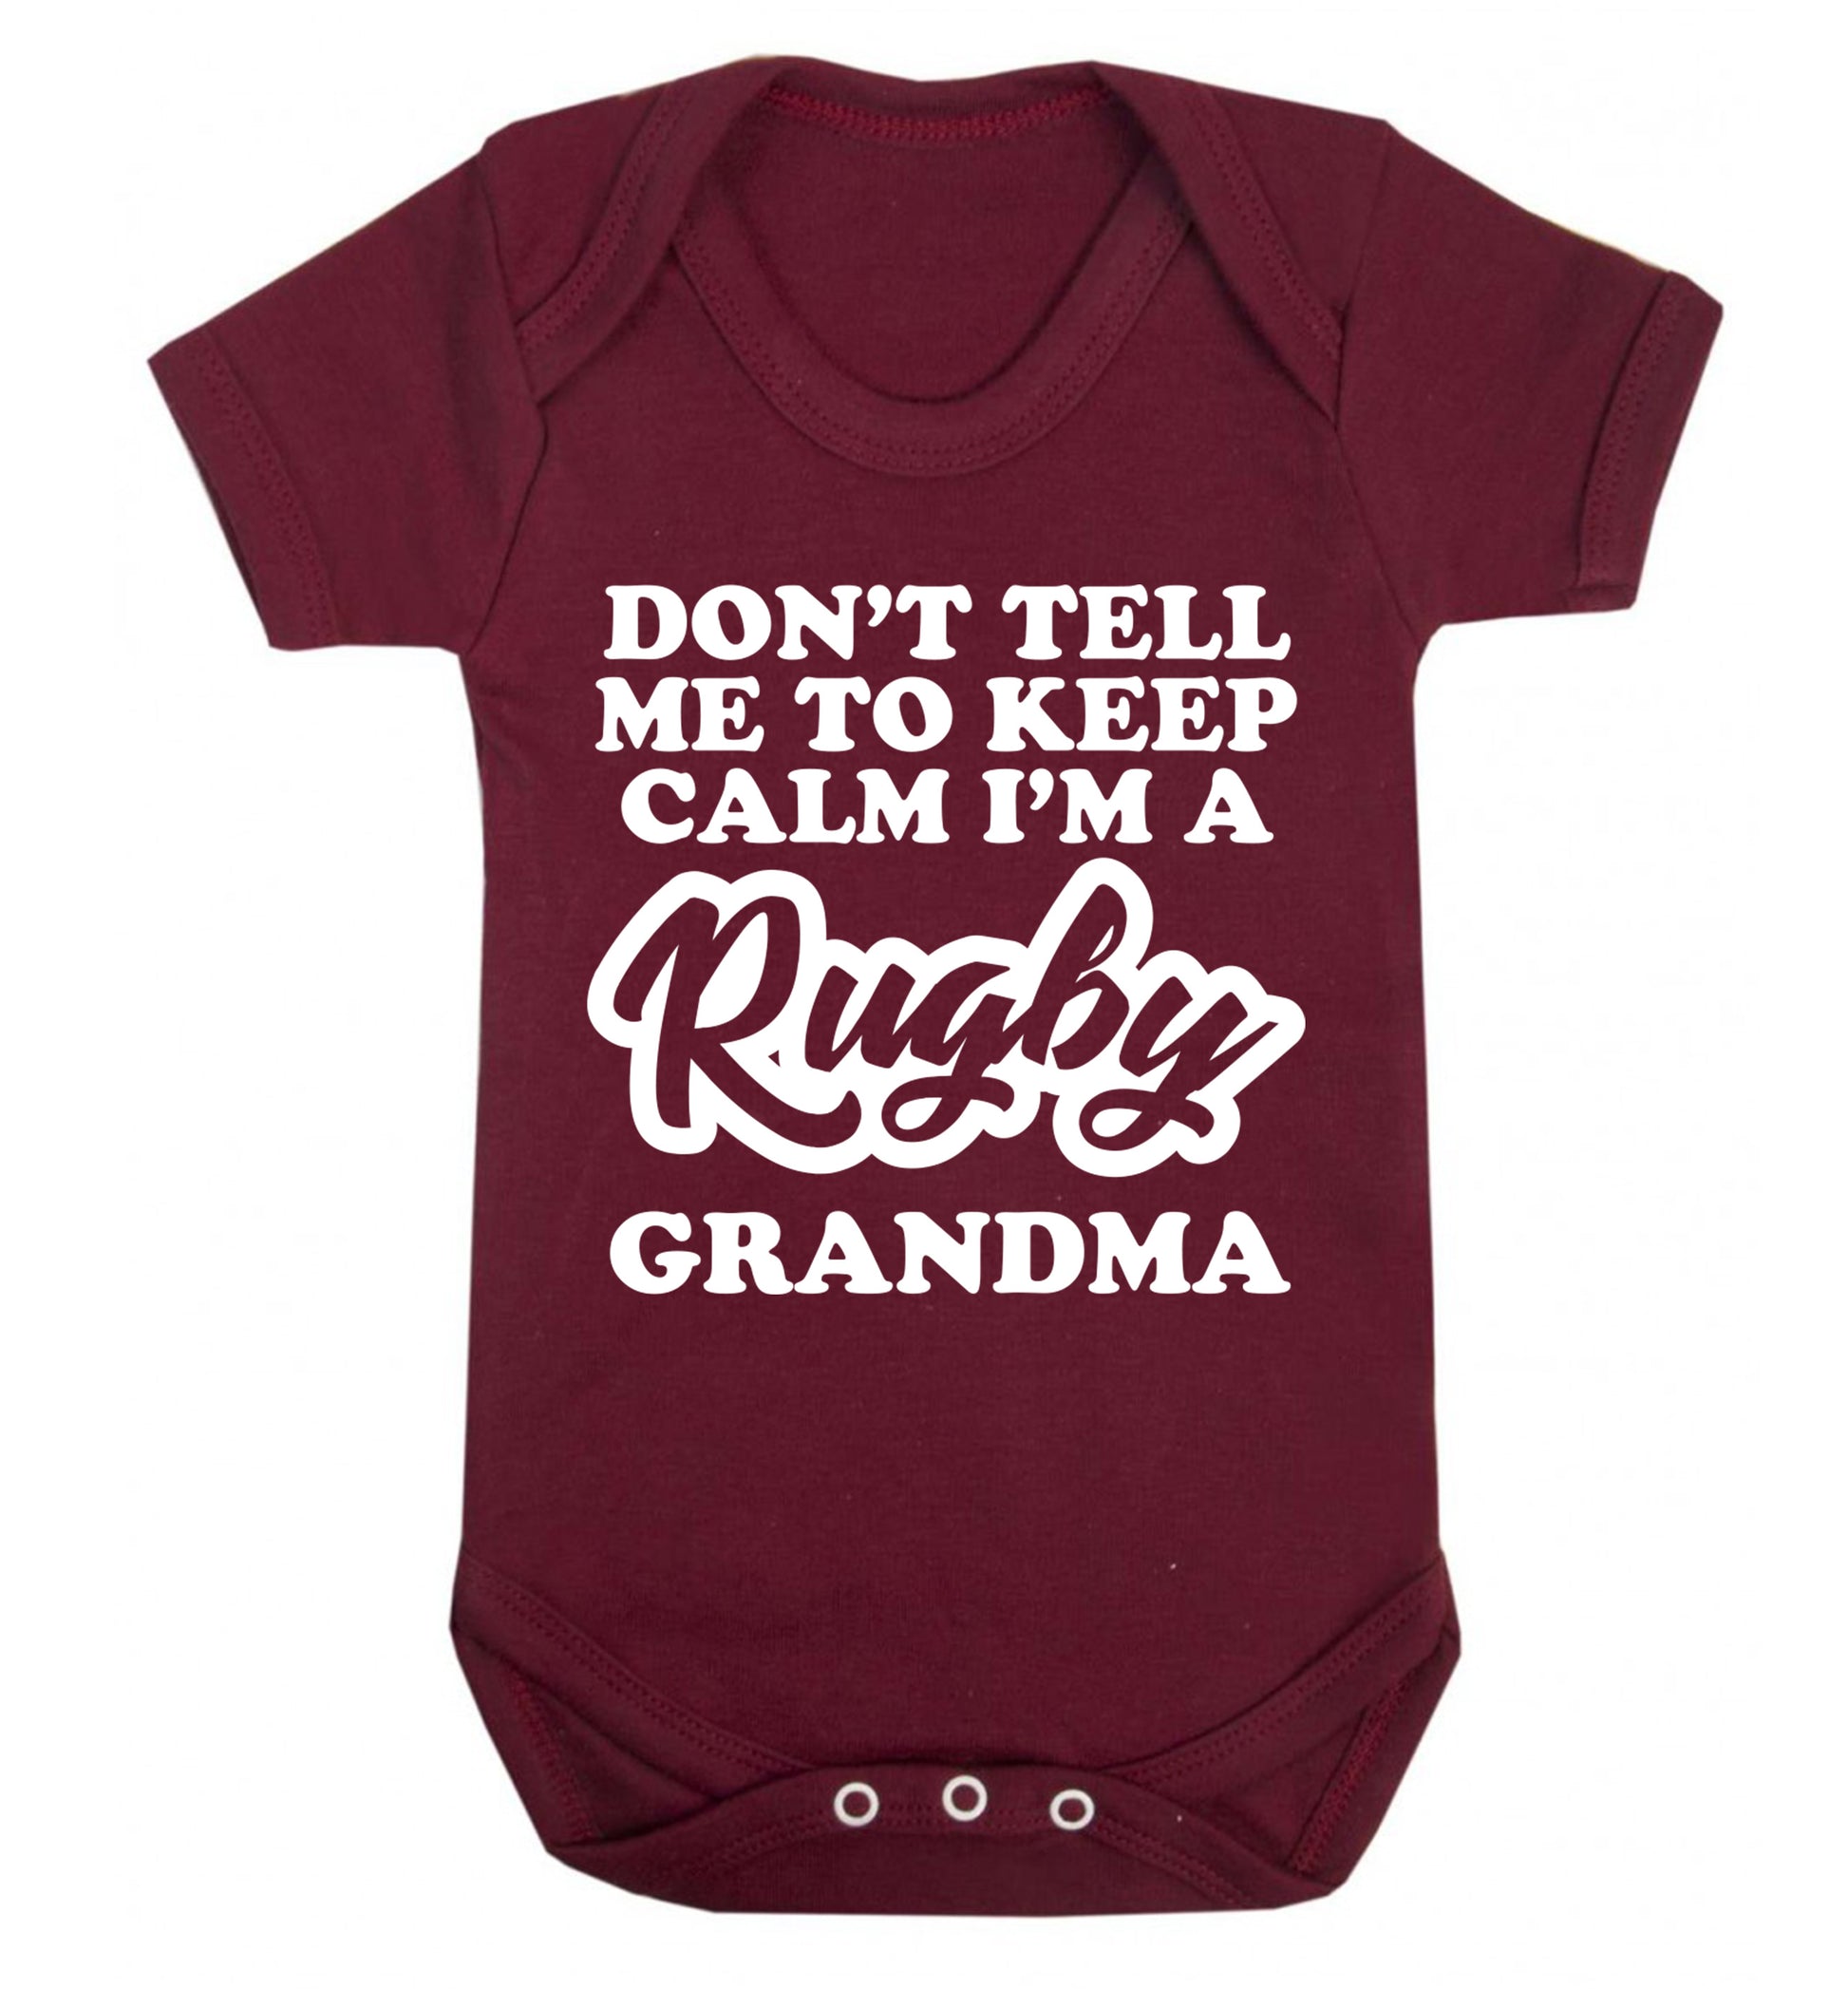 Don't tell me to keep calm I'm a rugby grandma Baby Vest maroon 18-24 months